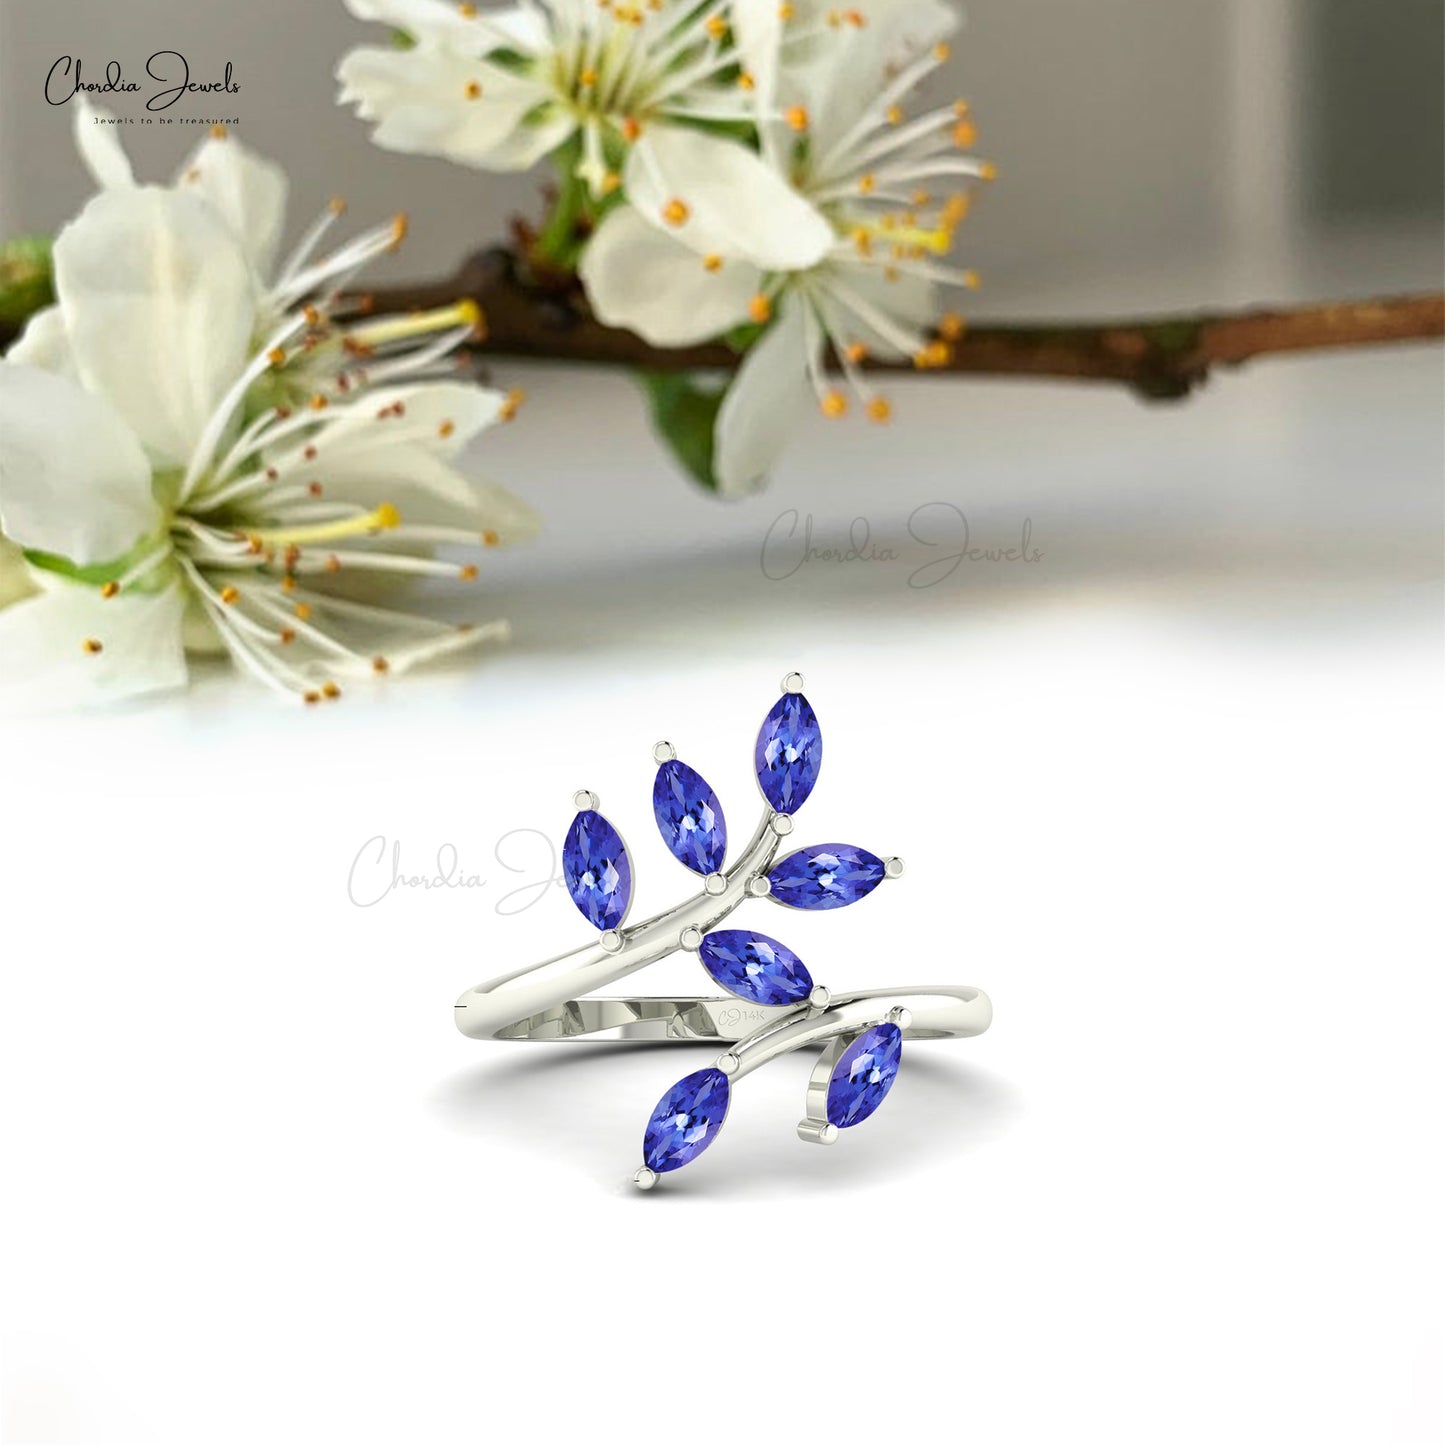 Real Blue Tanzanite Leaf Ring 14k Real Gold Prong Set Fiance Ring 5x2.5mm Natural Marquise Cut Gemstone Vintage Fine Jewelry For Her